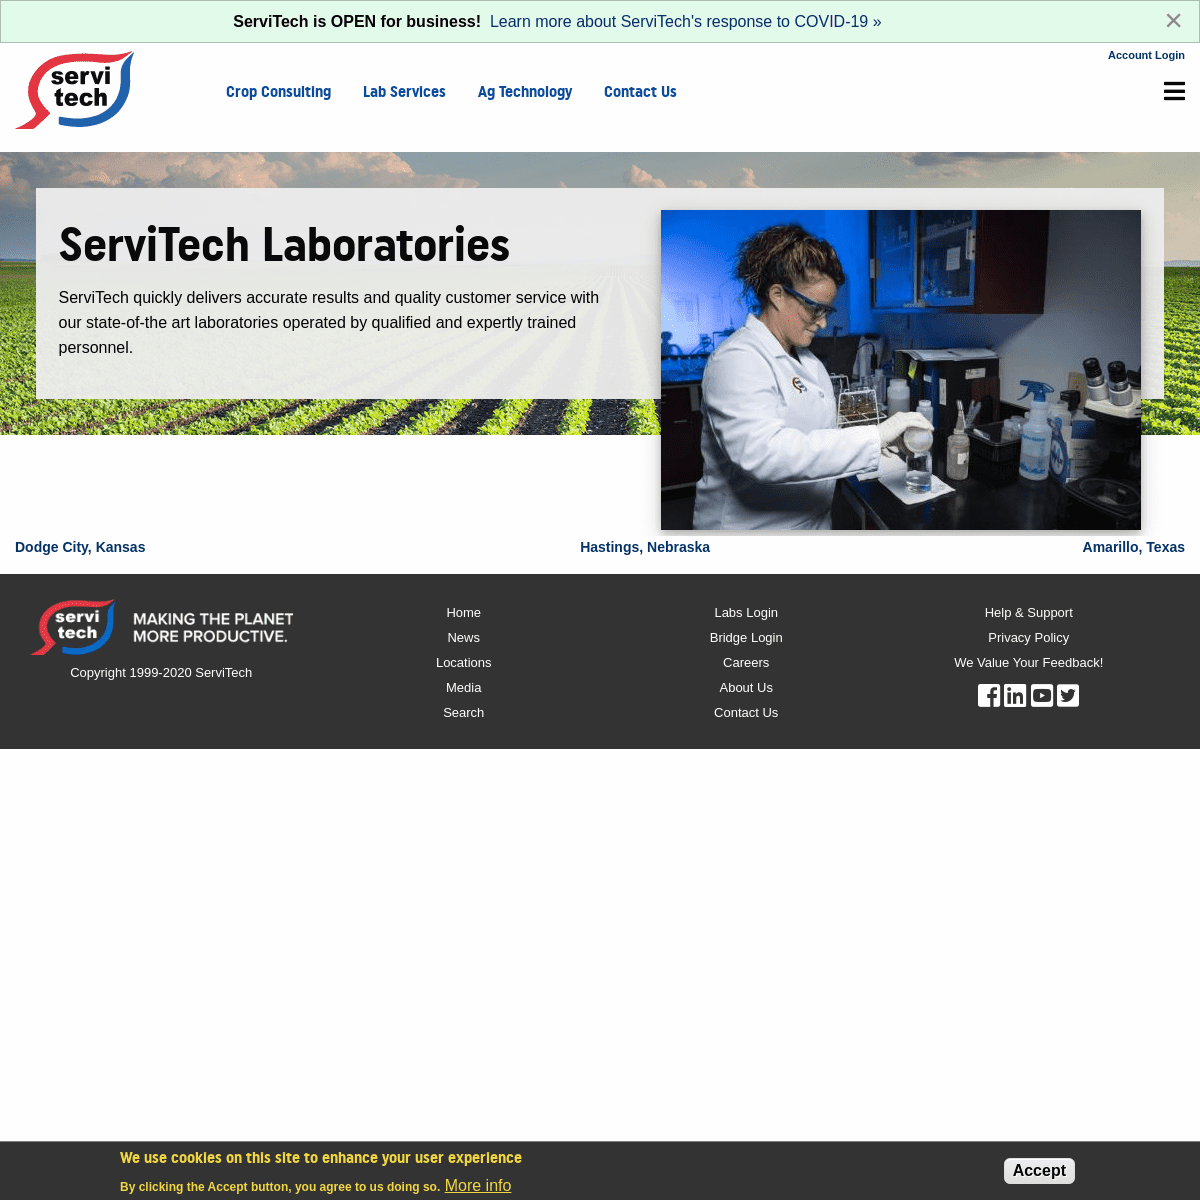 A complete backup of https://servitechlabs.com